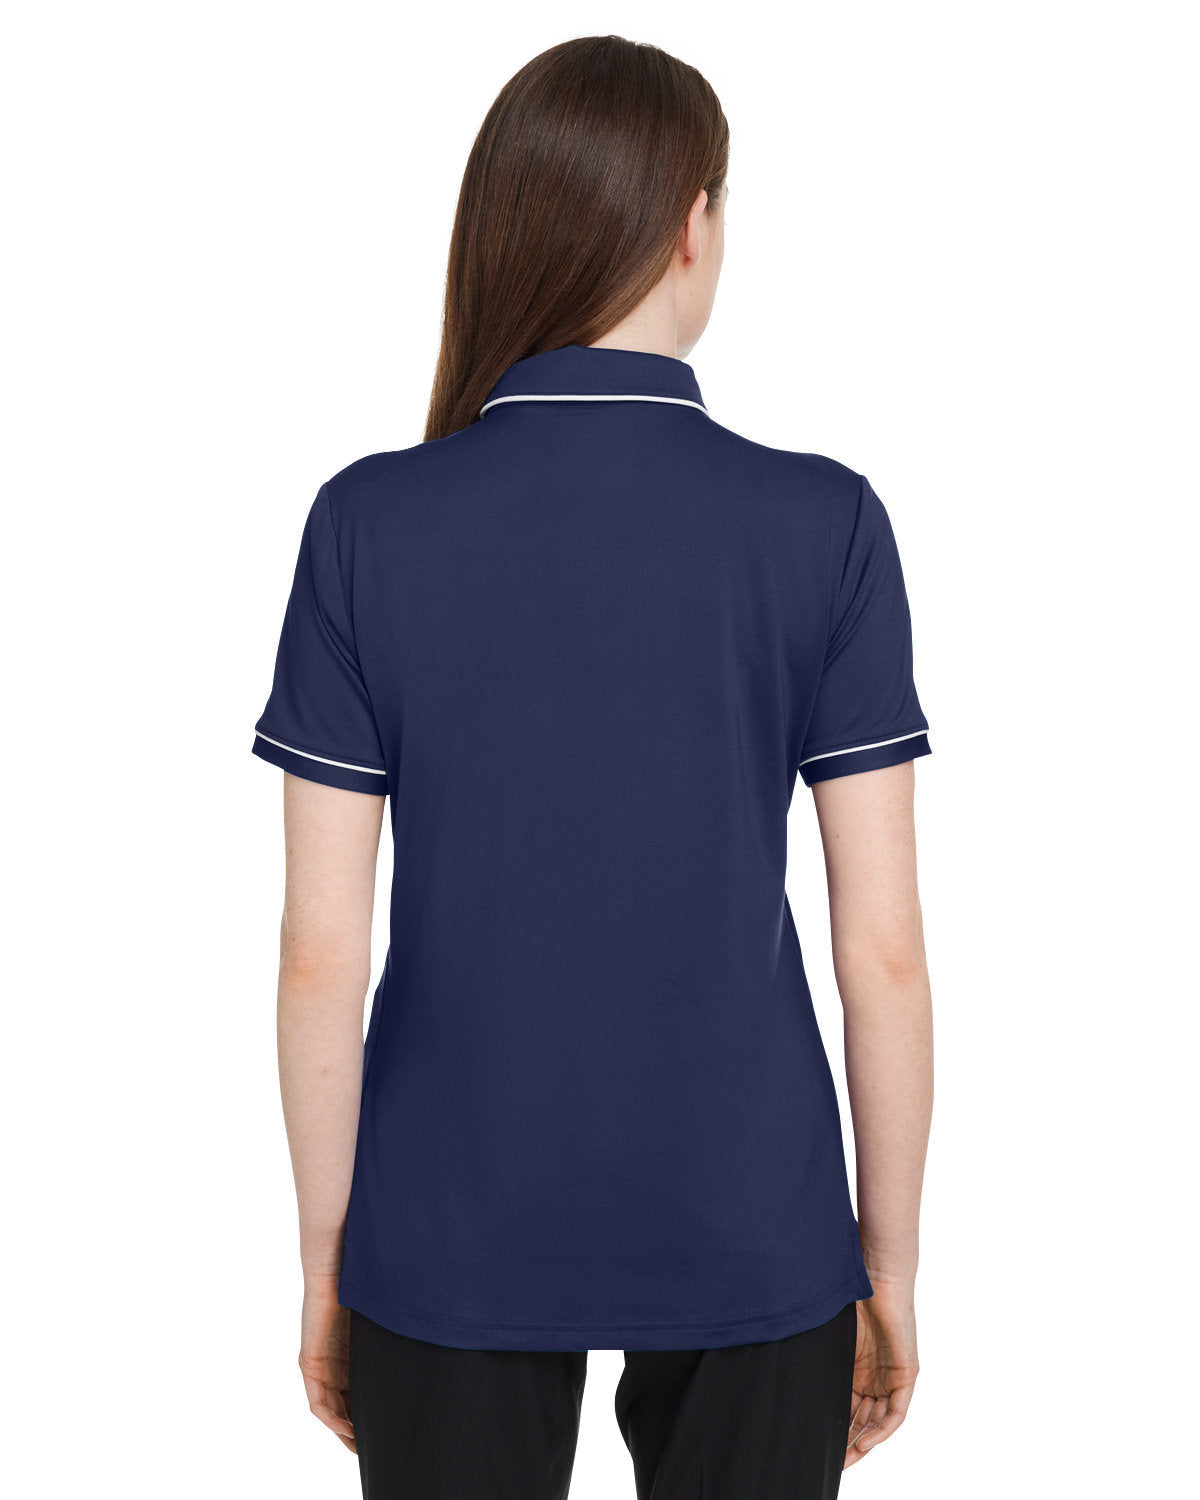 Under Armour Ladies Tipped Teams Performance Customized Polos, Navy